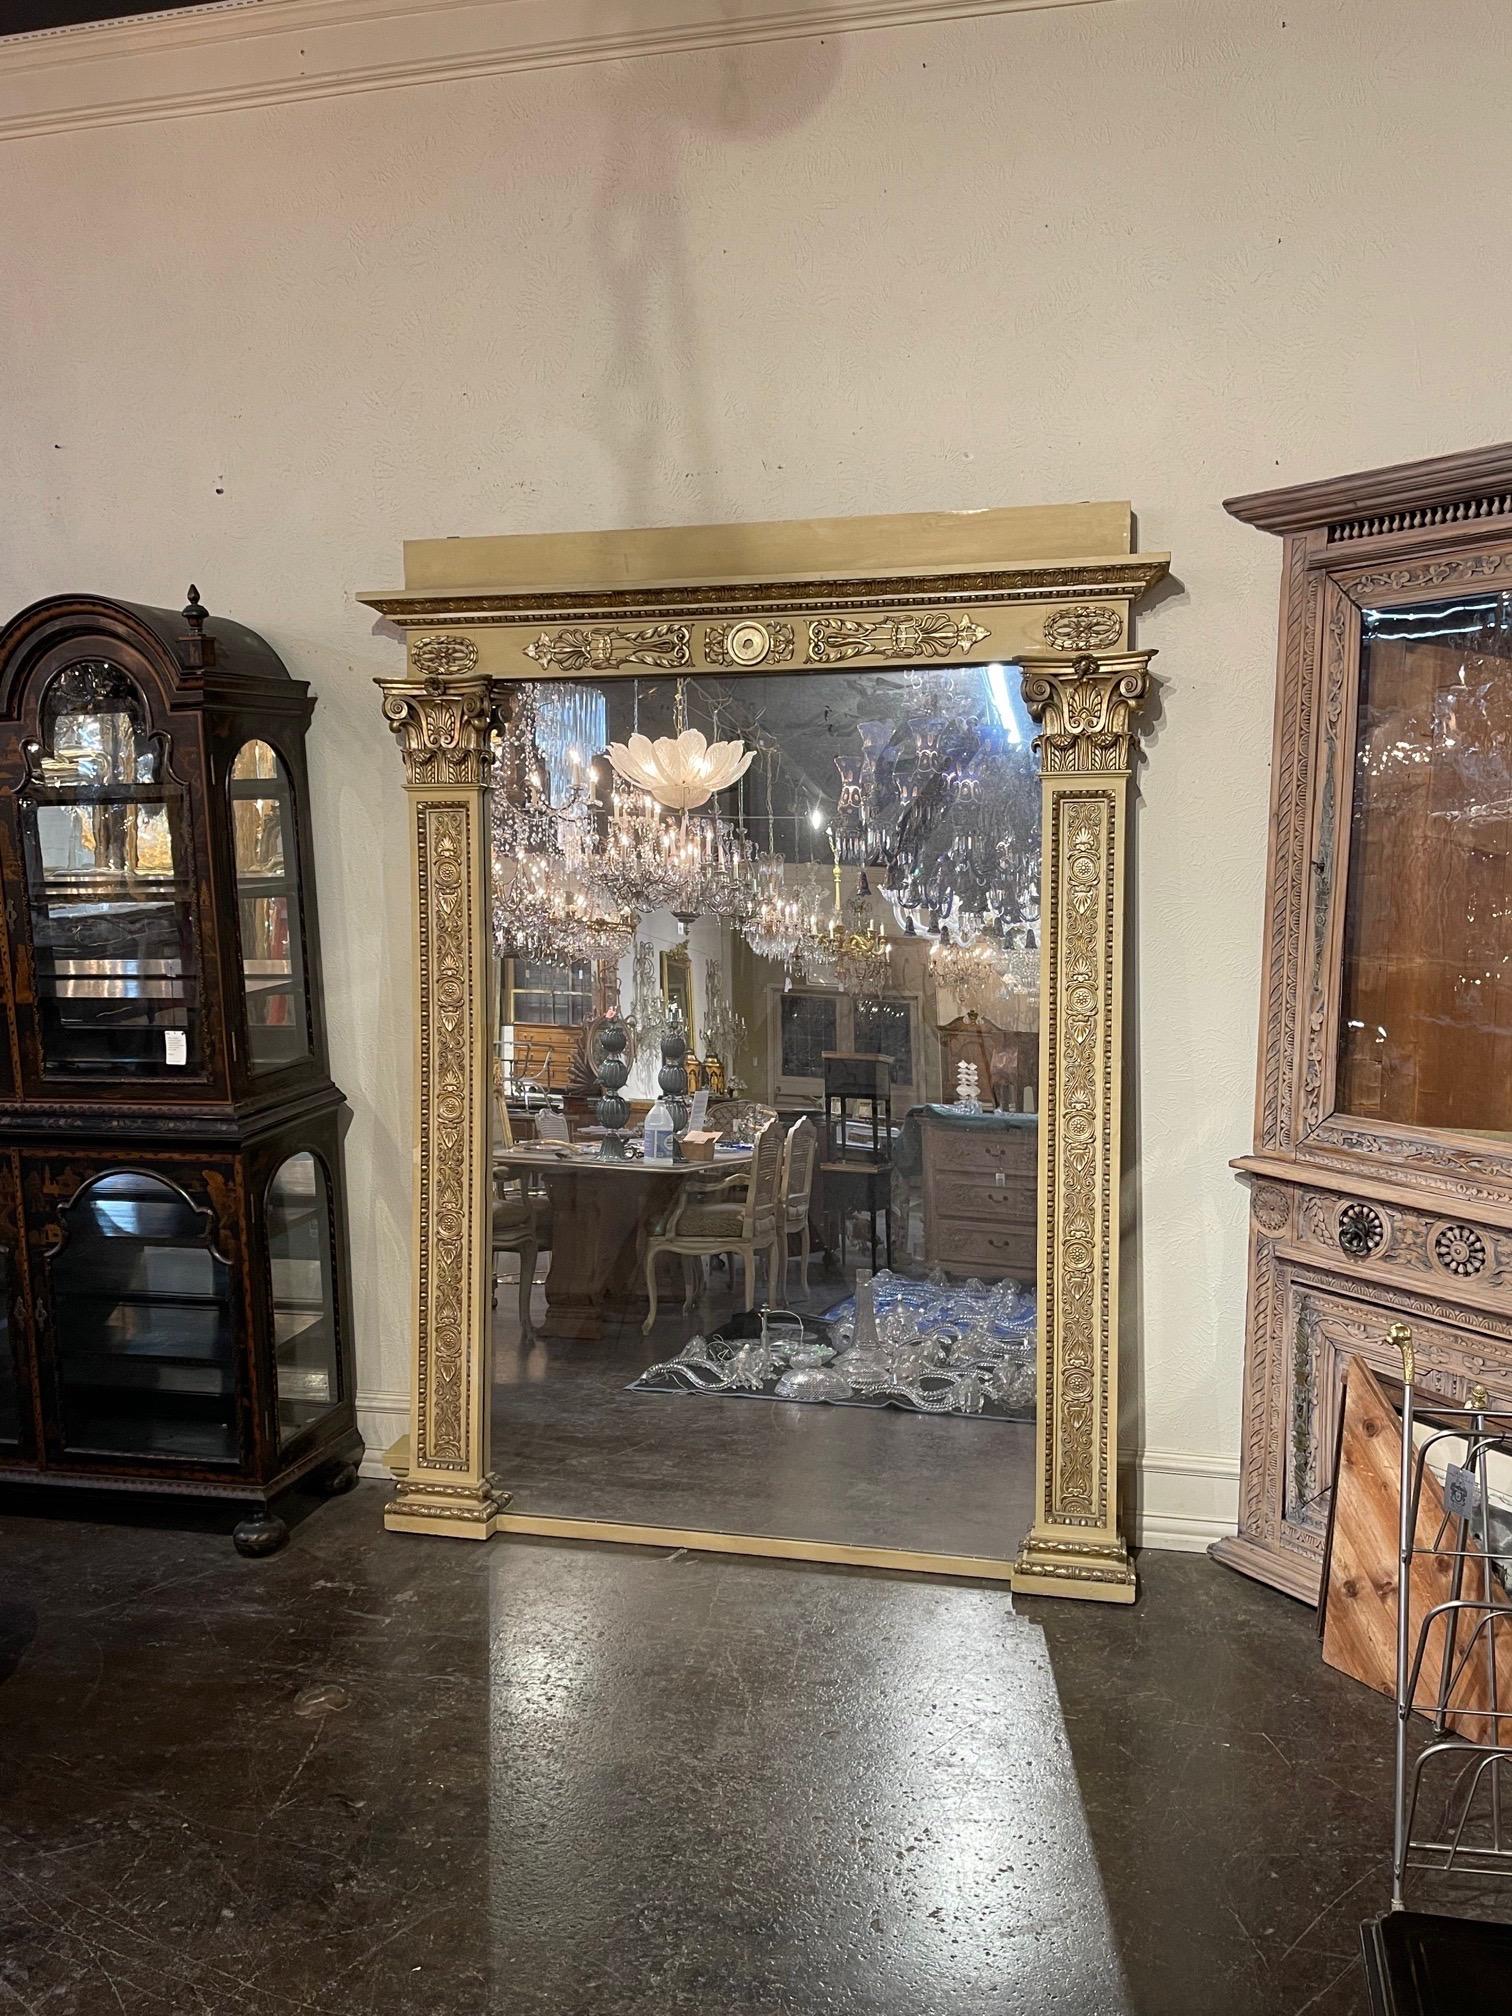 Exceptional large scale carved and parcel-gilt floor mirror. Very fine carvings and fabulous patina on this mirror. Exquisite!!